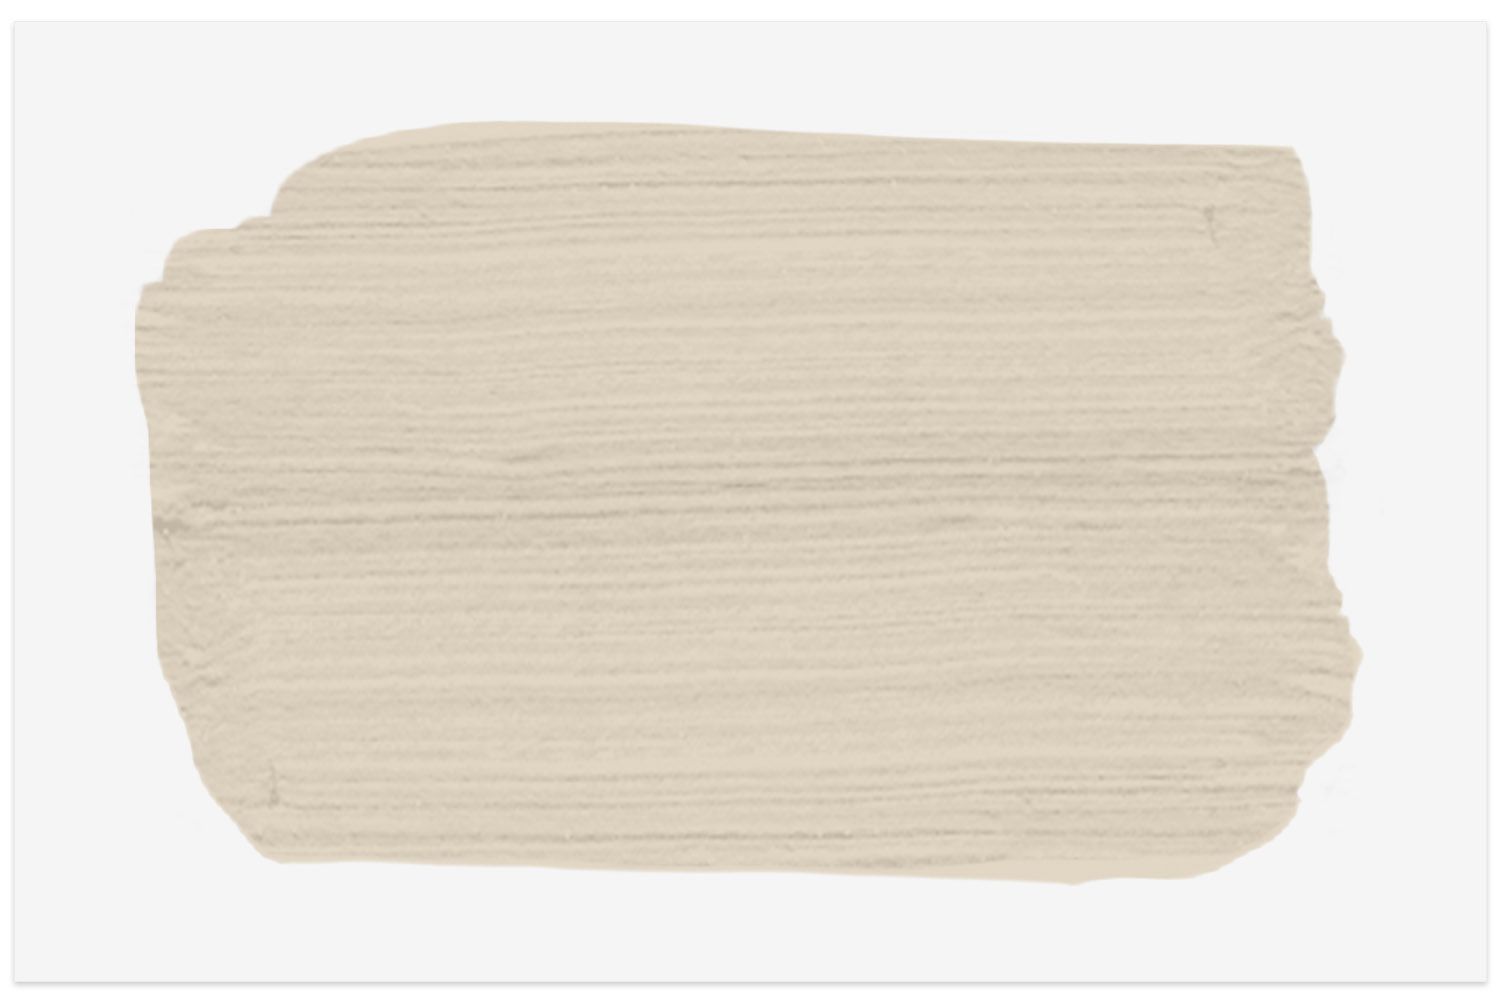 Rococo Beige HDC-NT-15 paint swatch from Behr